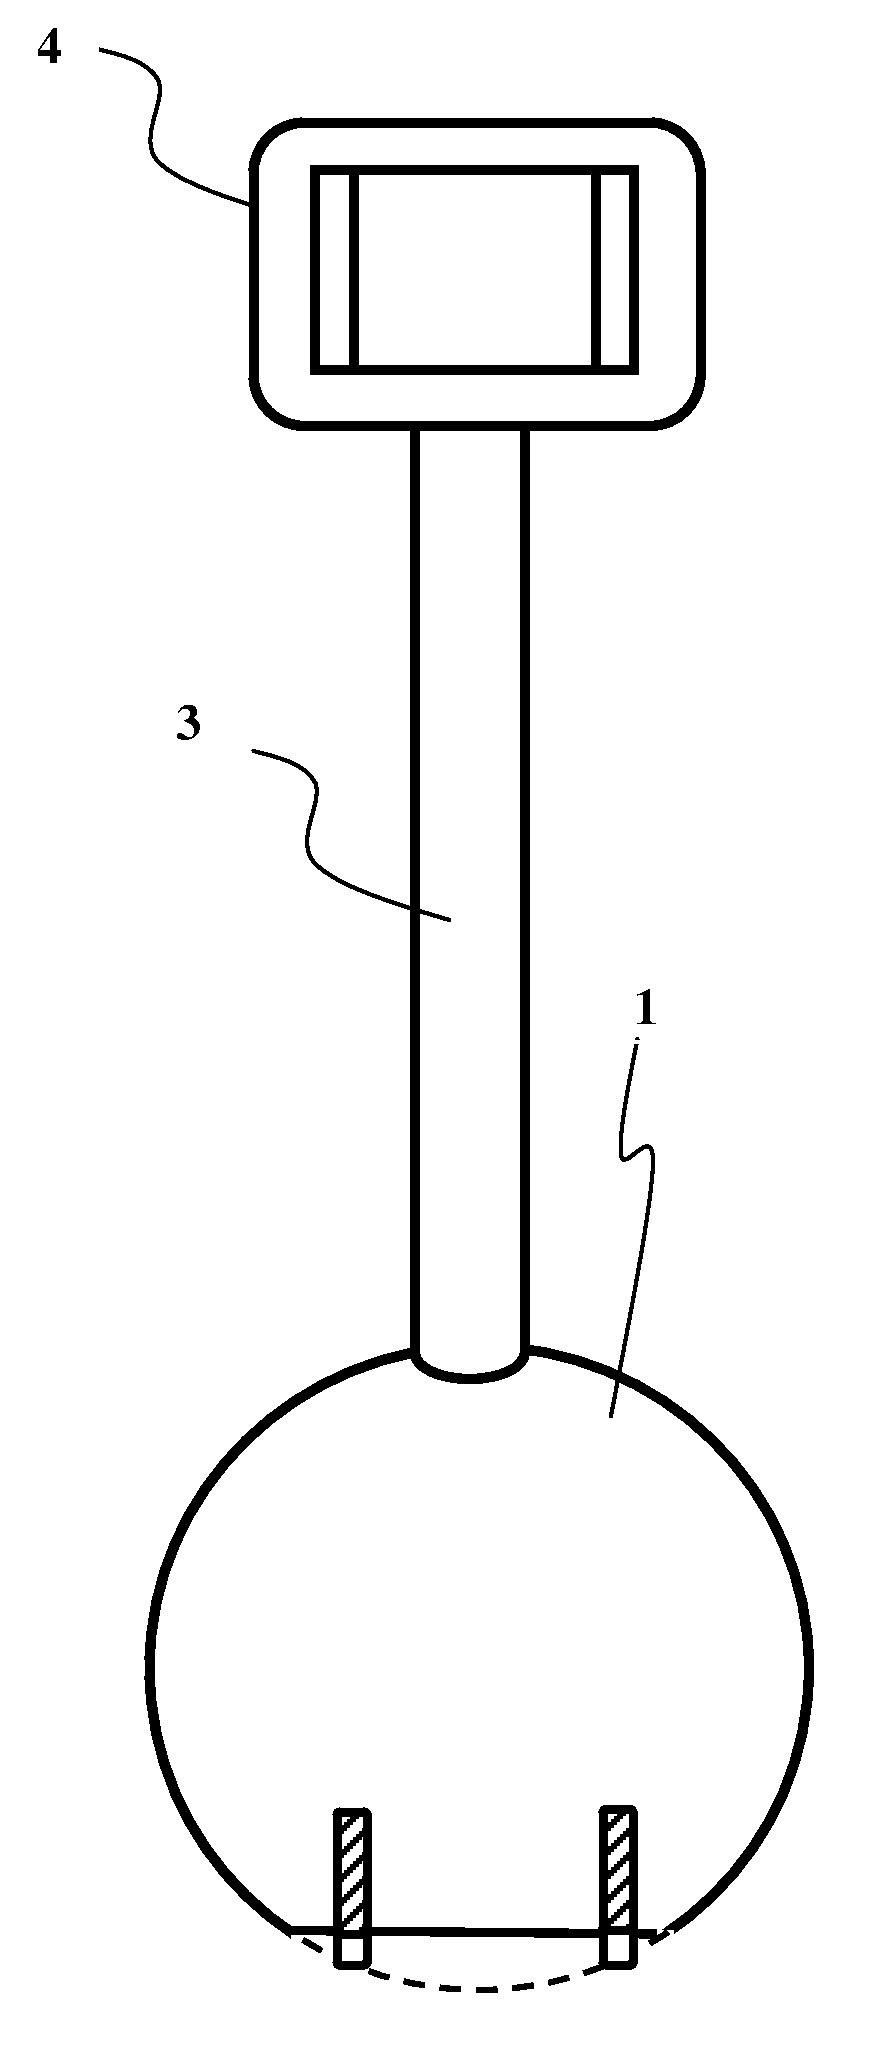 Mobile apparatus that can recover from toppling